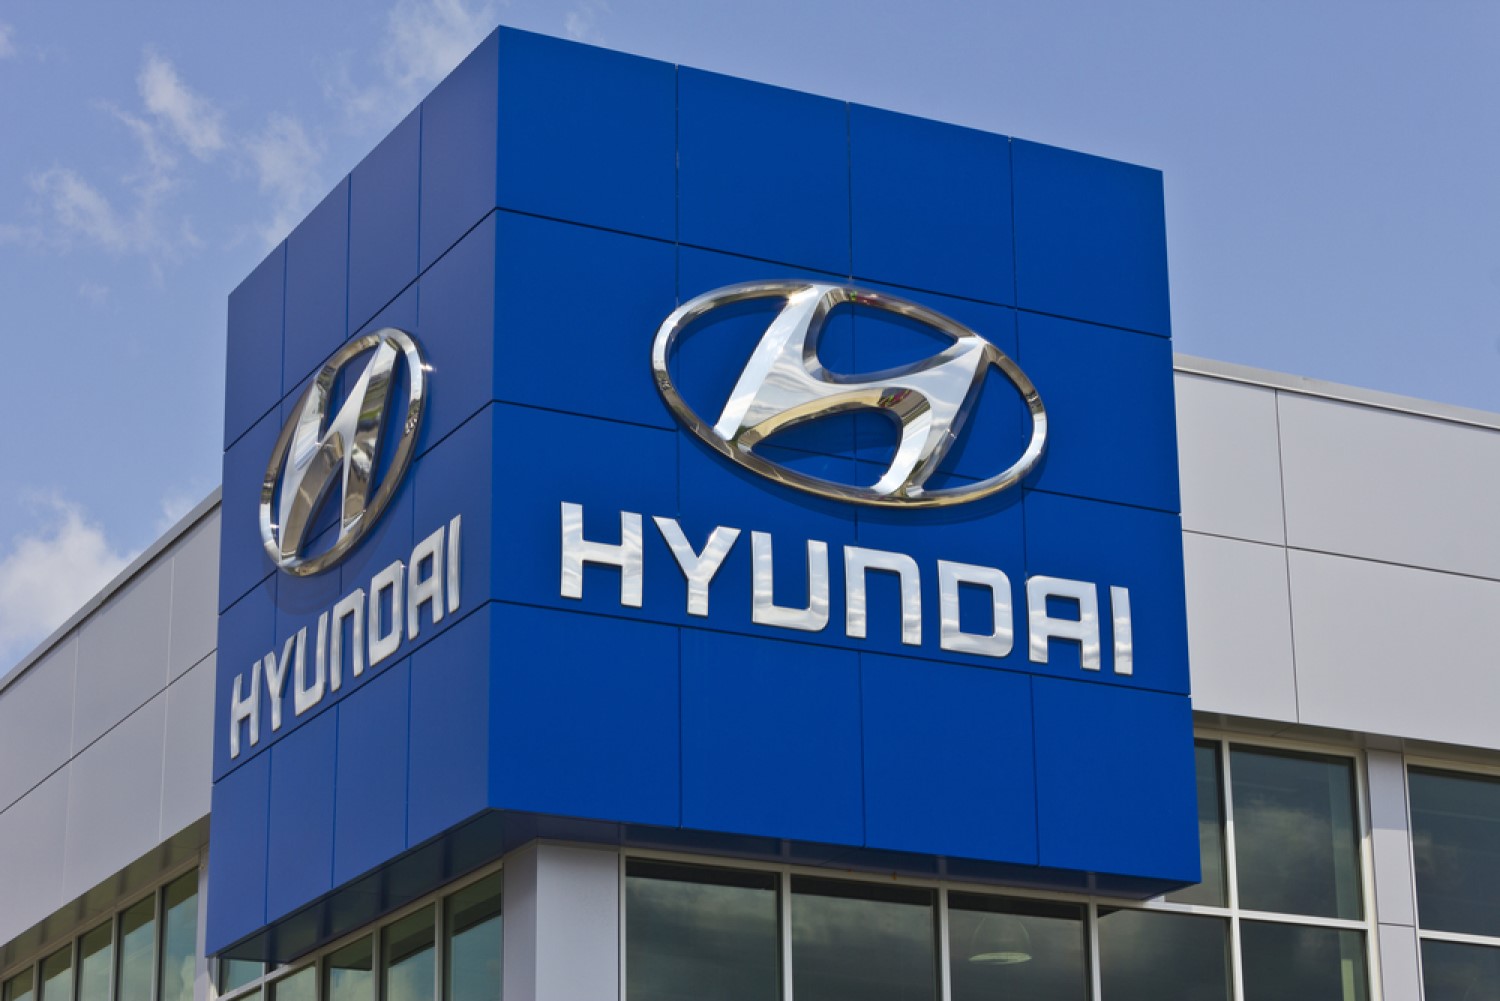 Binance-backed-blockchain-auditing-firm-partners-with-hyundai-subsidiary-to-track-internet-of-things-devices